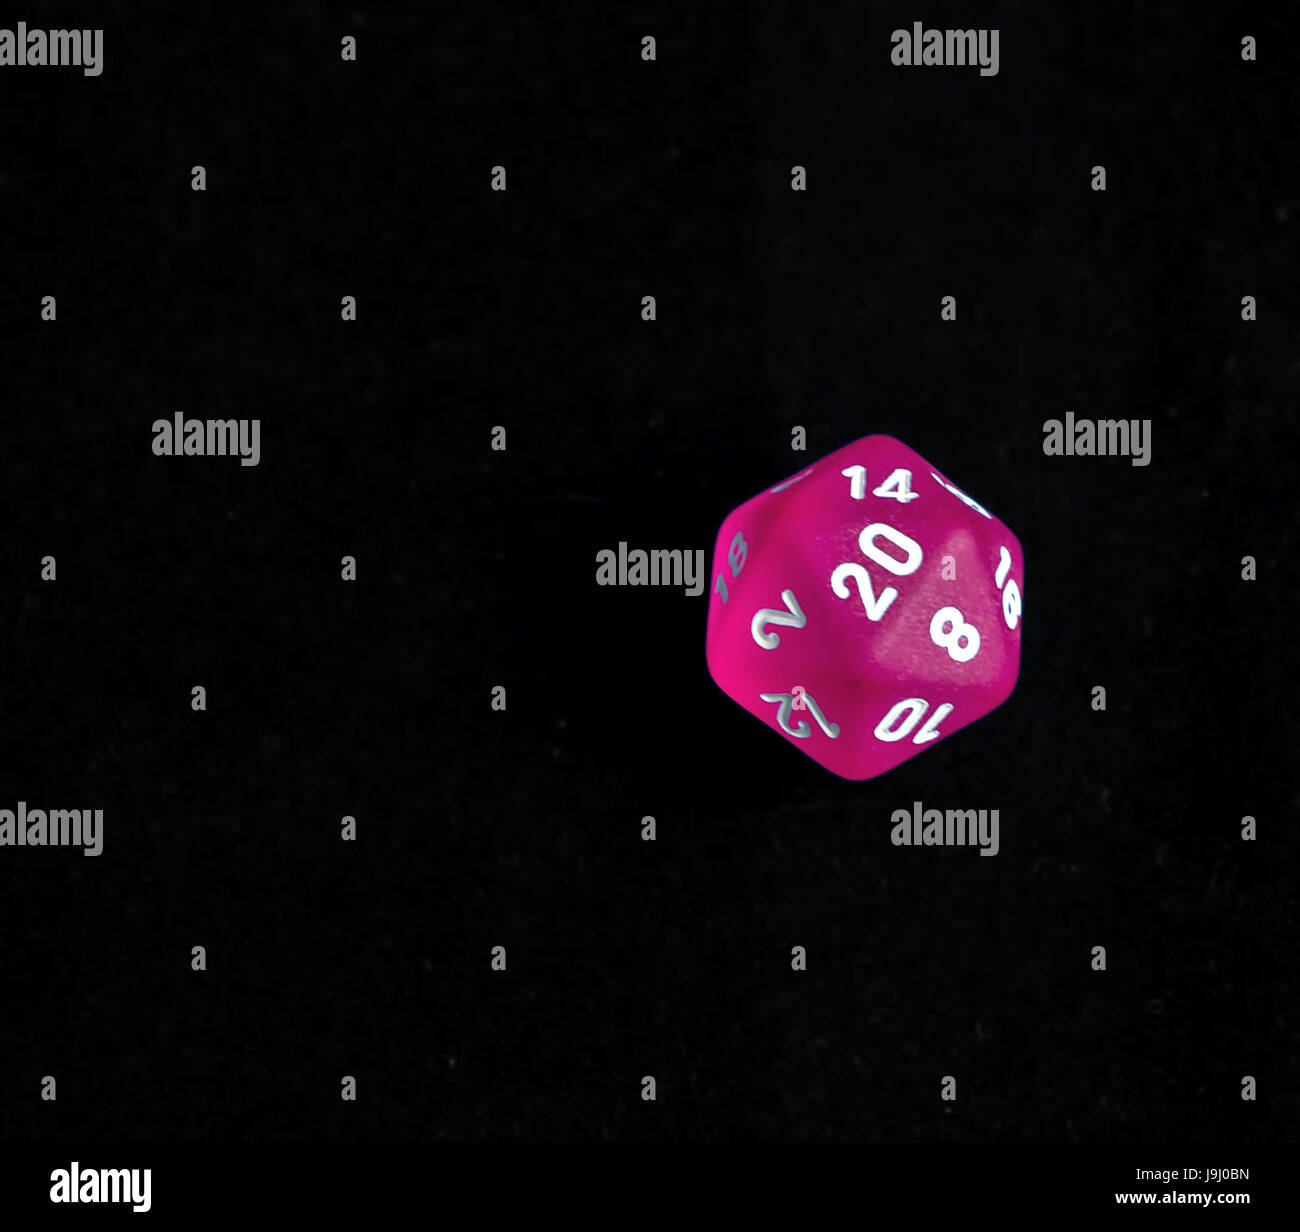 Pink d20 critical success roll RPG polyhedral game dice Stock Photo